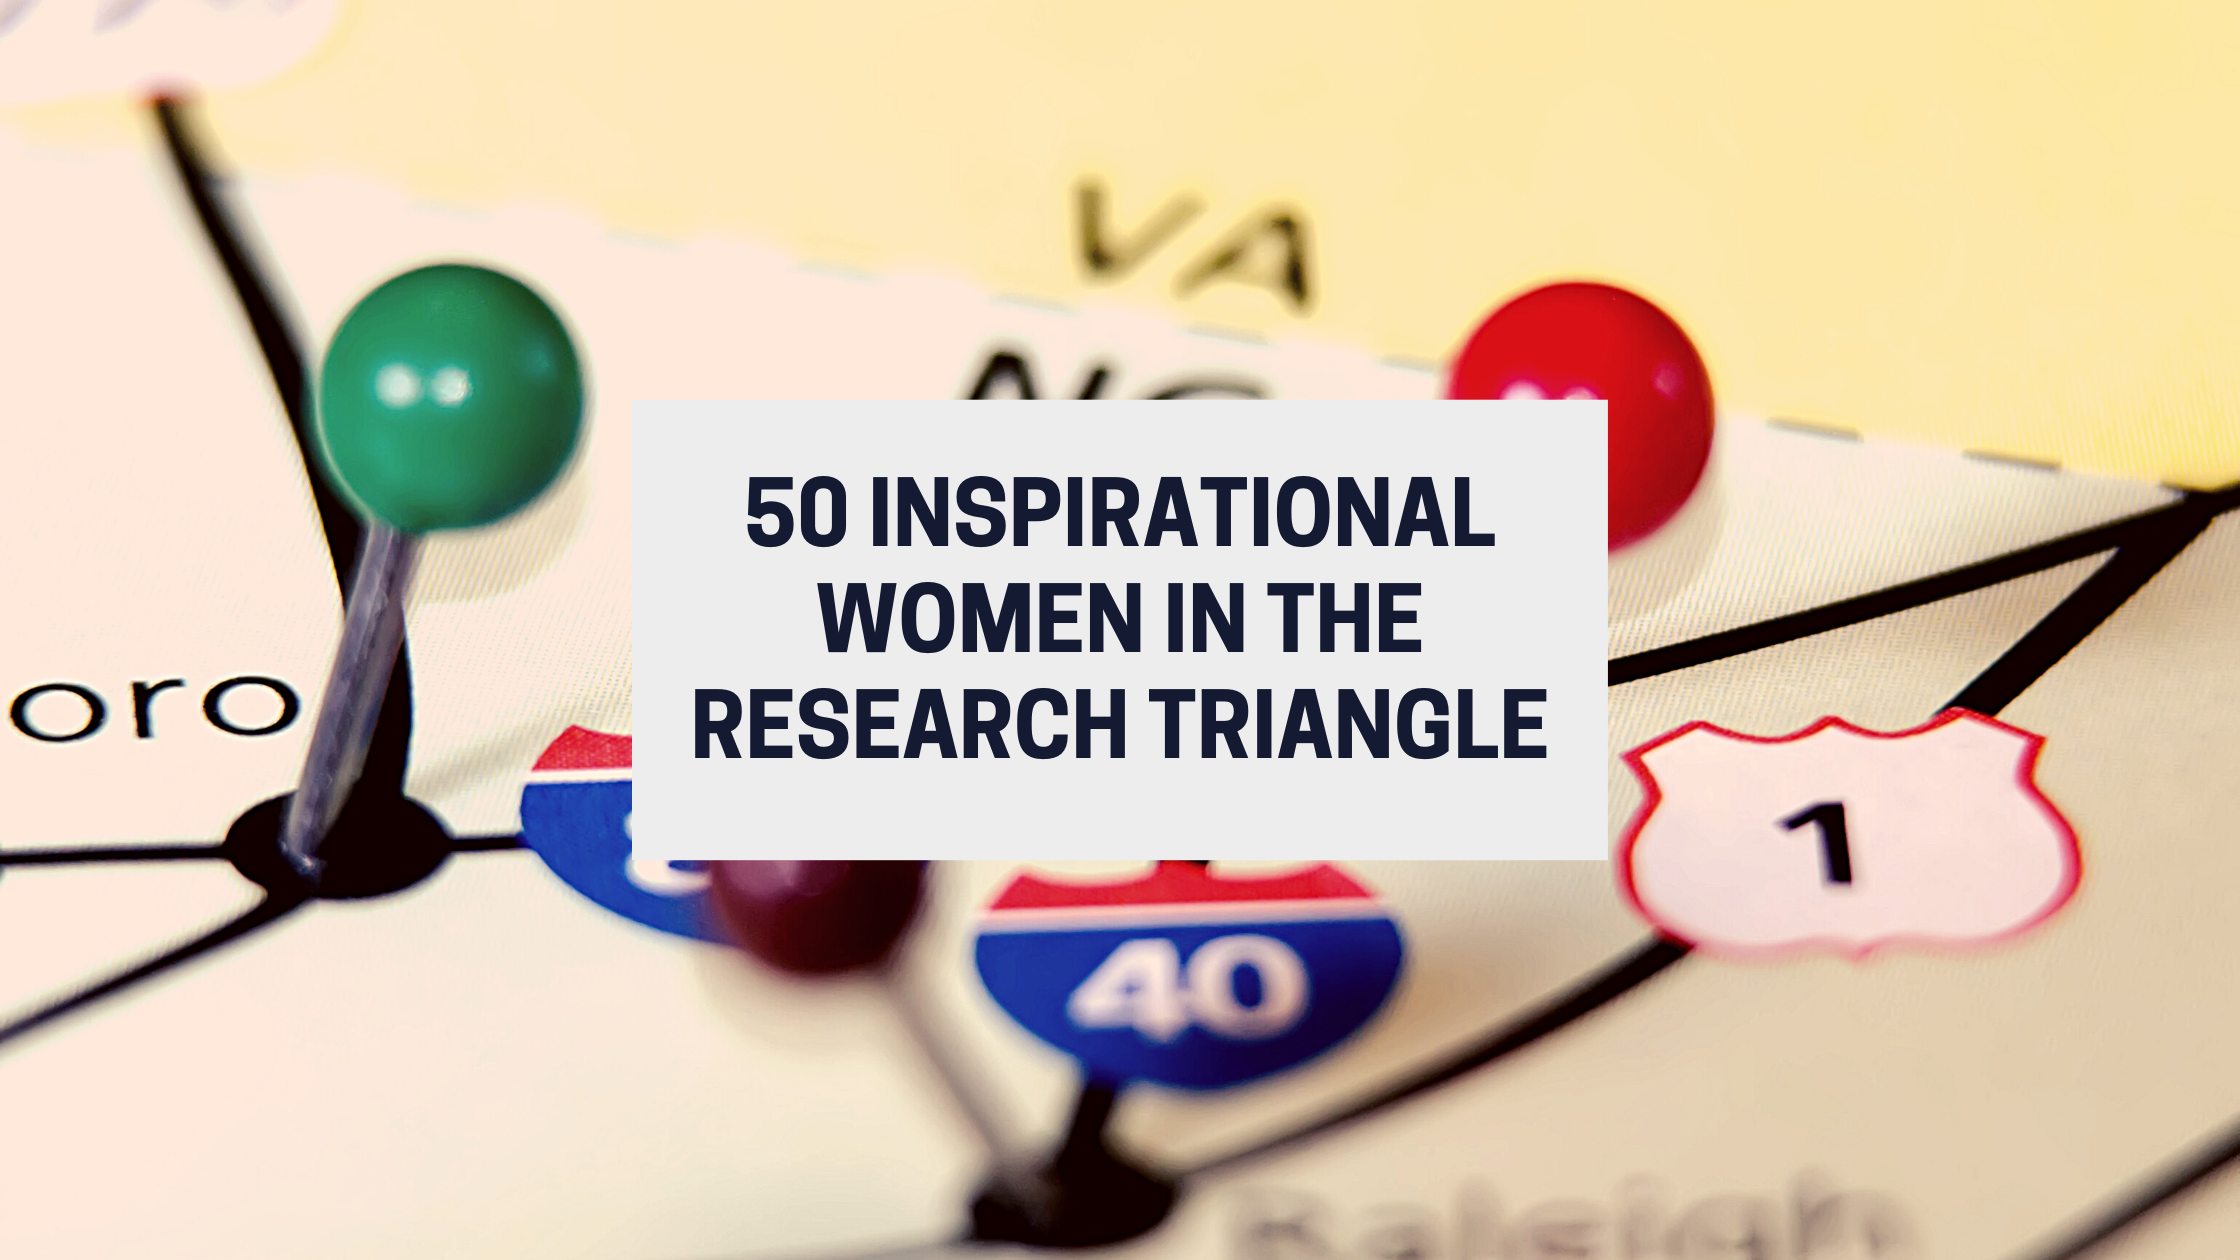 50 inspirational women in the triangle
